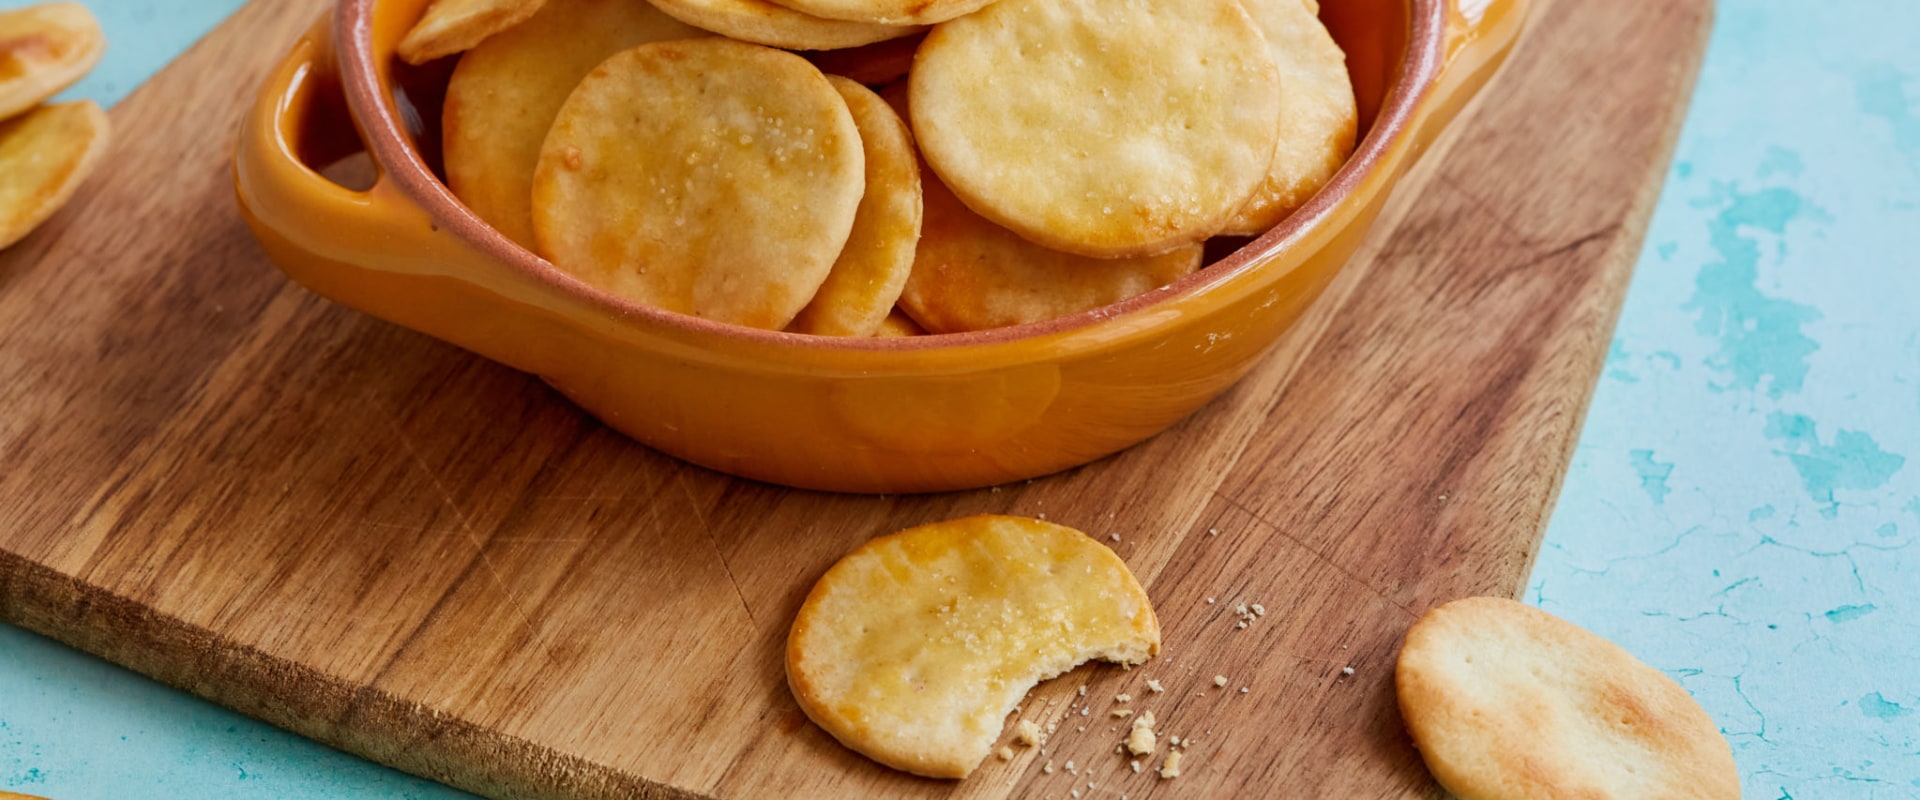 Homemade Crackers and Chips